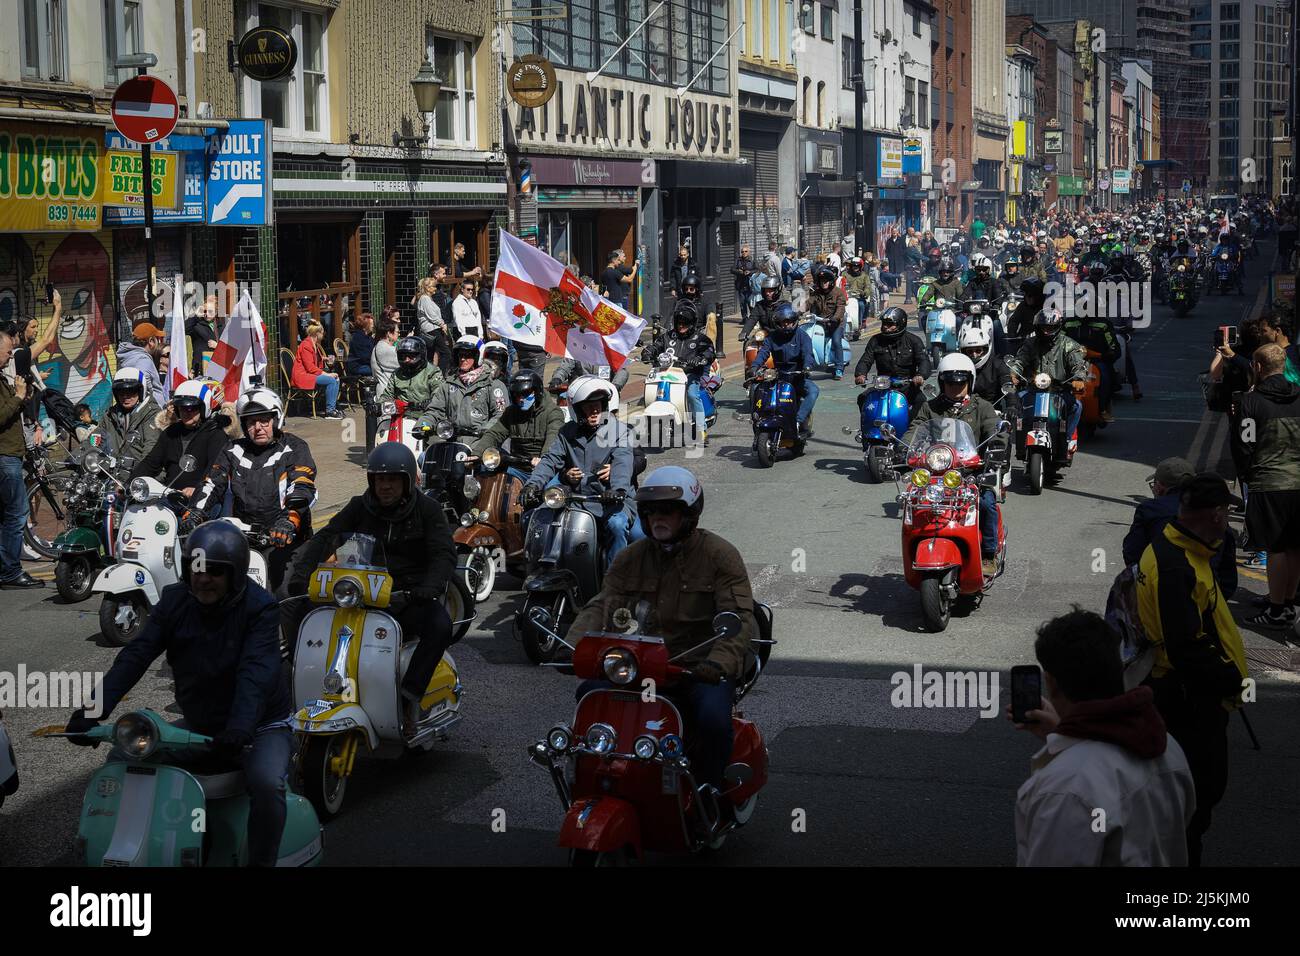 Manchester, UK. 24th Apr, 2022. Hundreds of Mod Scooters join the the annual St Georges Day parade as it passes through the city. Hundreds of people join in the annual celebration which marks the death of the patron Saint Of England.ÊAndy Barton/Alamy Live News Credit: Andy Barton/Alamy Live News Stock Photo